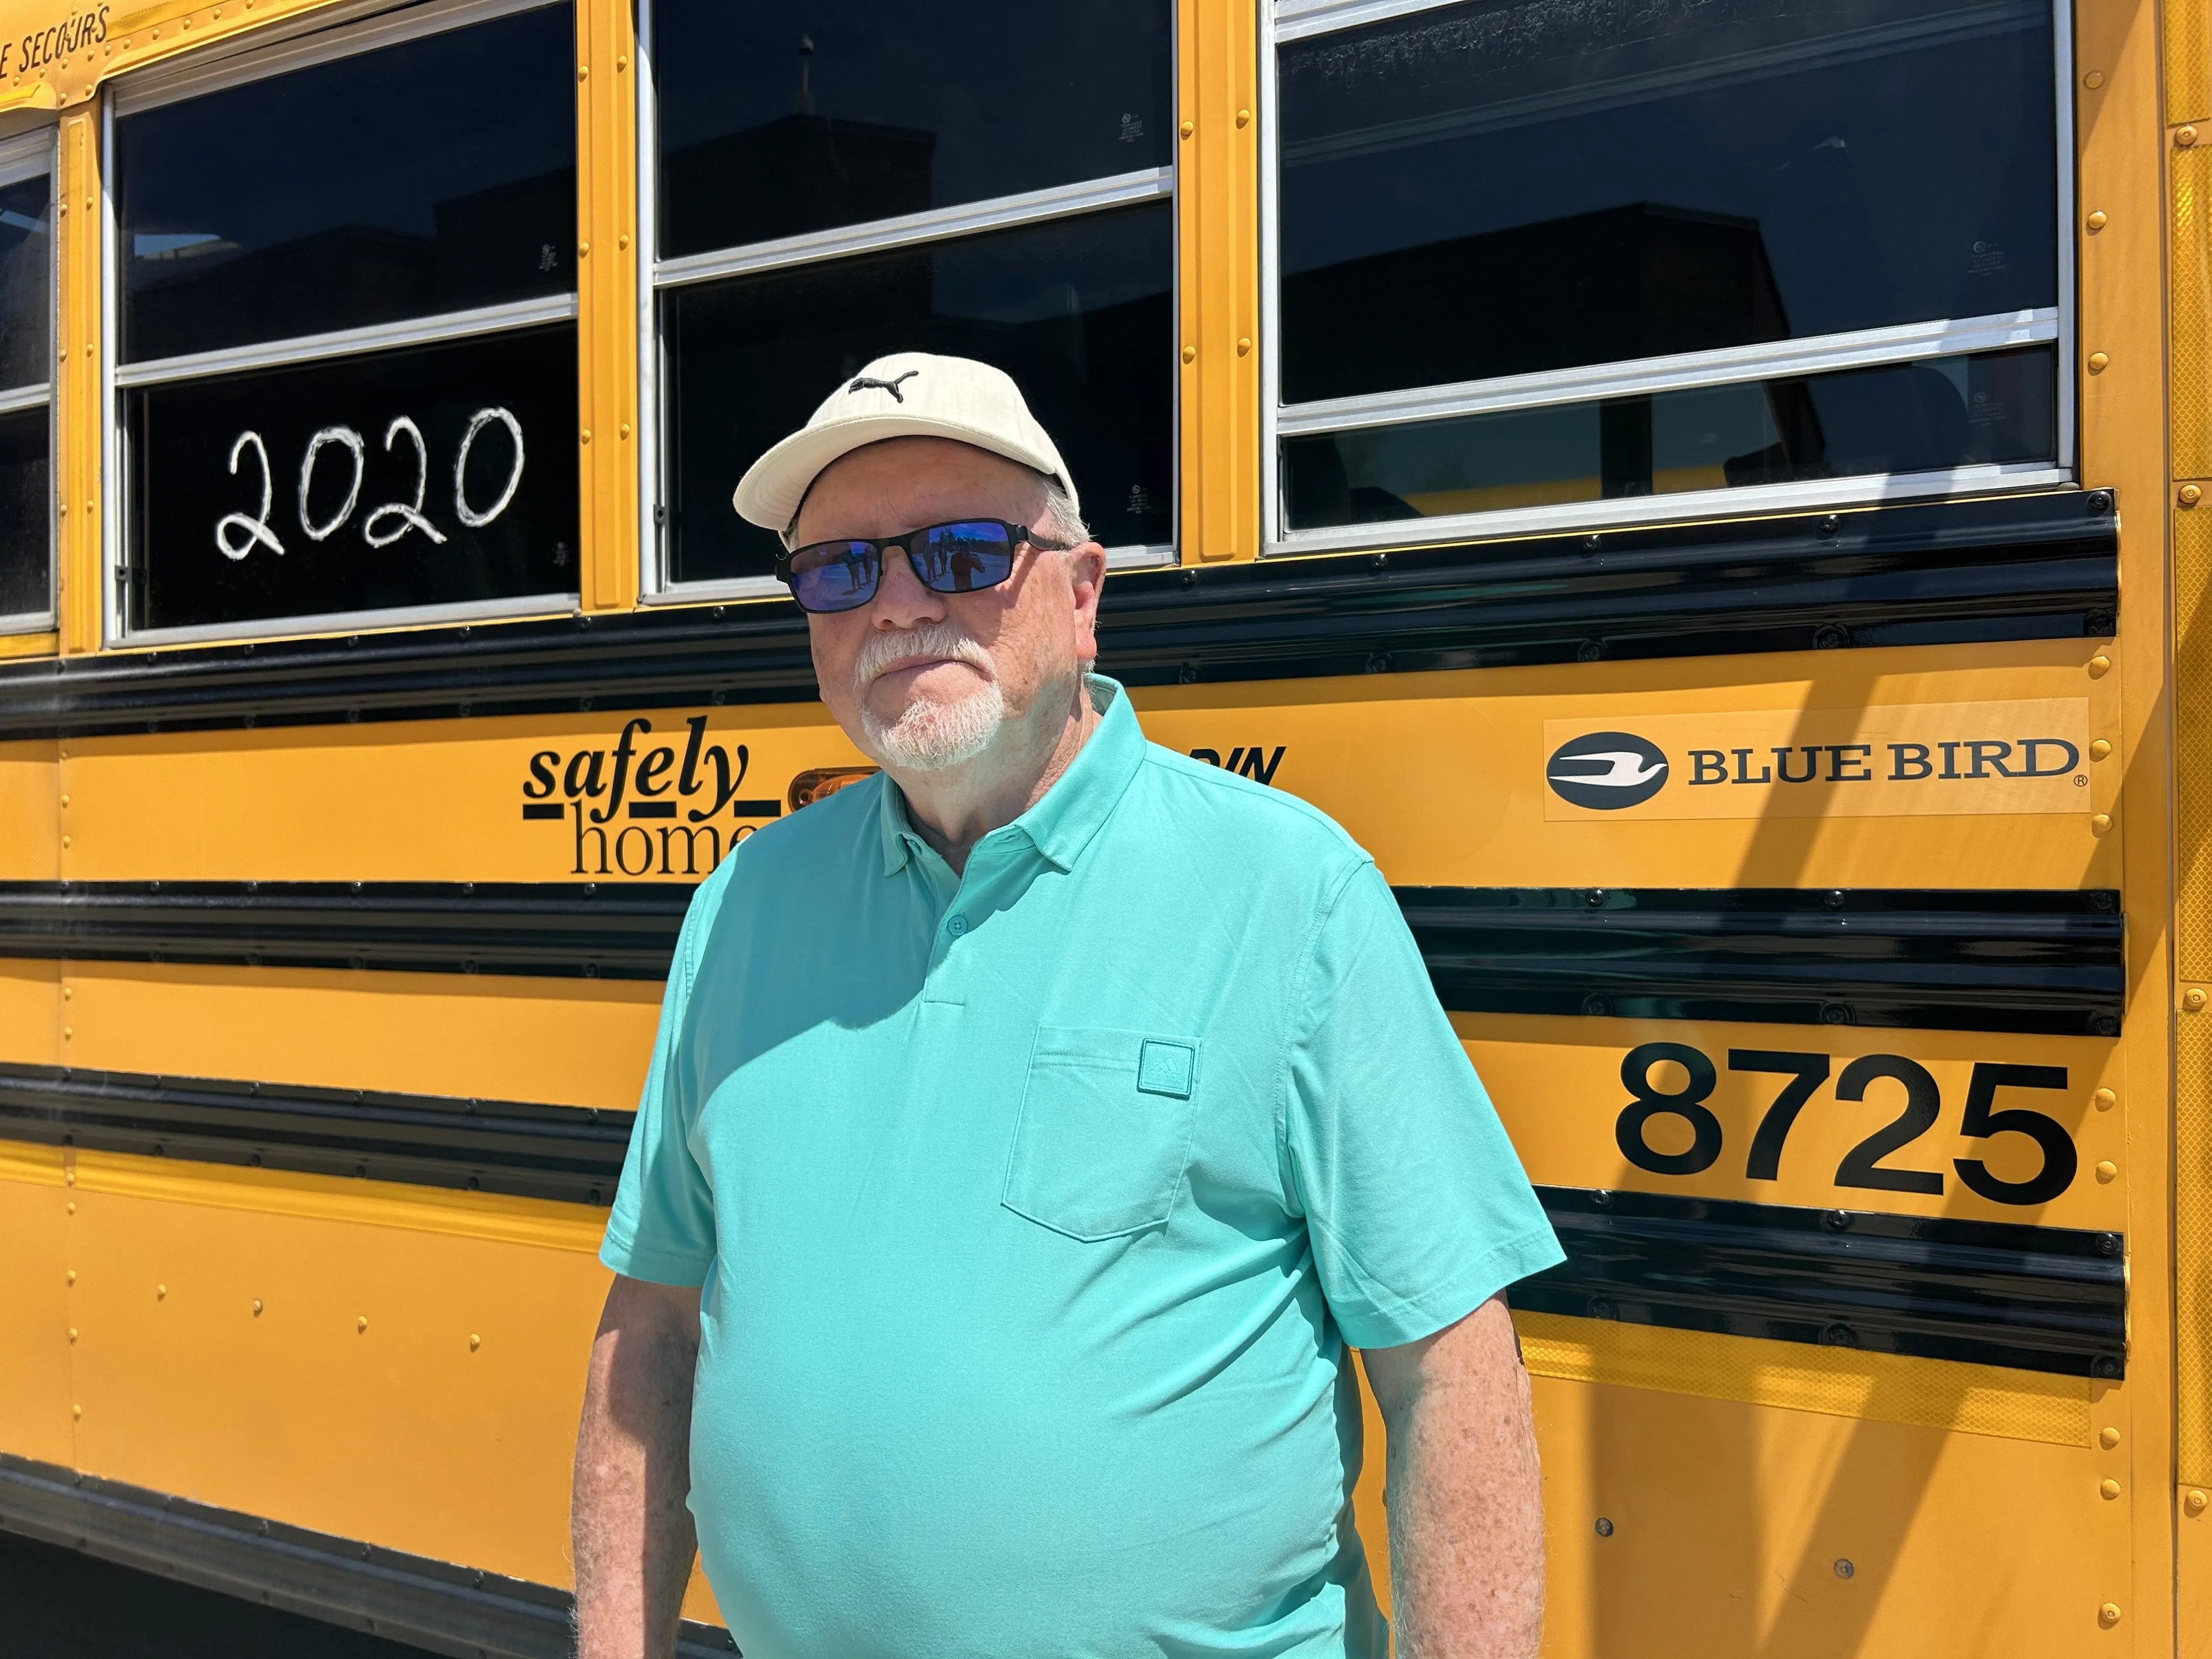 Halifax bus driver awarded for heroism, saving 23 students